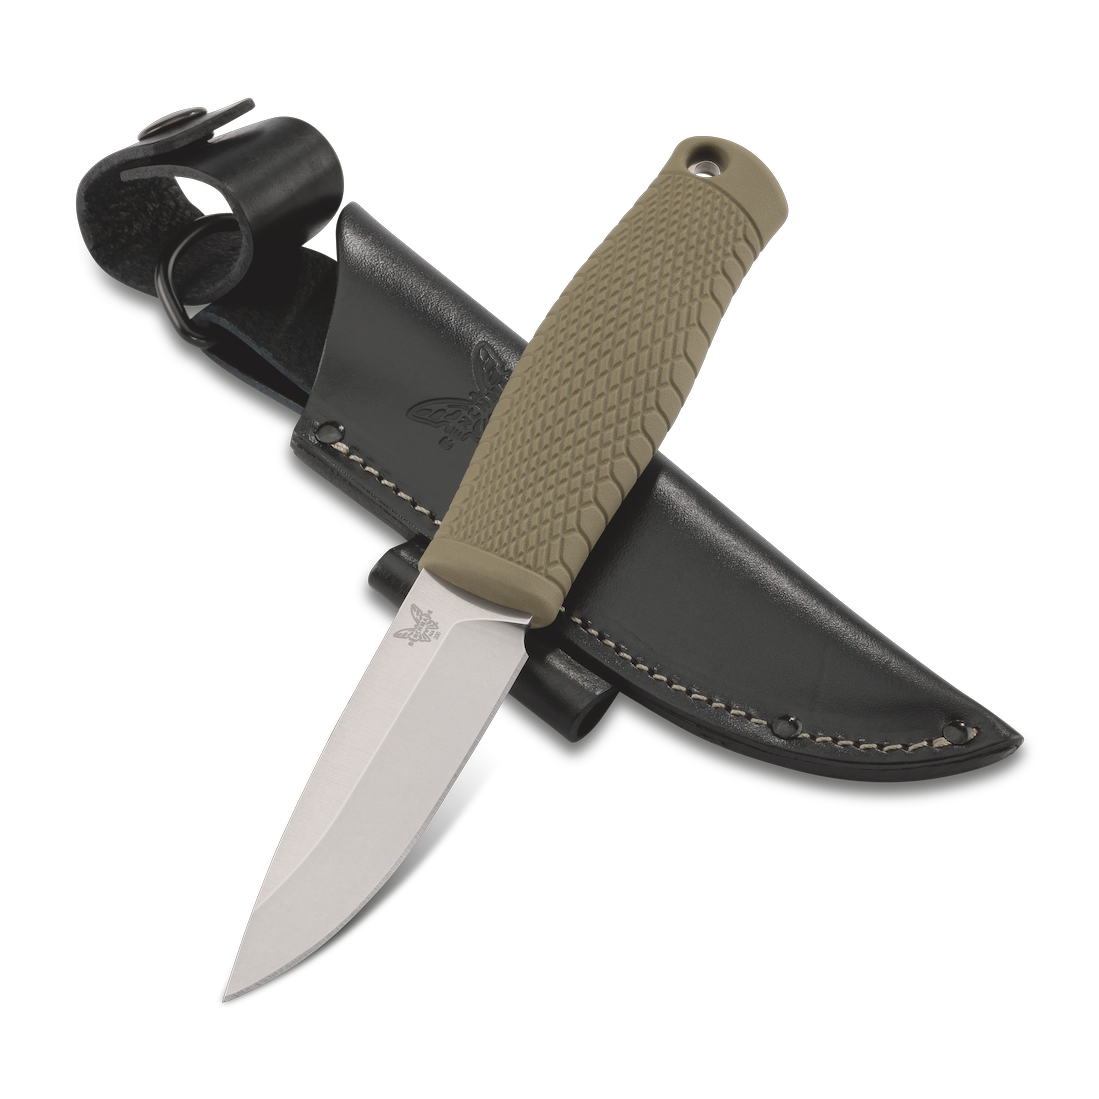 camp knife toor knife, overlanding, over land, overland, off-road, offroad, off-roading, off-road knife, overland knife, best overland knife, vehicle supported adventure, every day carry, EDC KNIFE, 